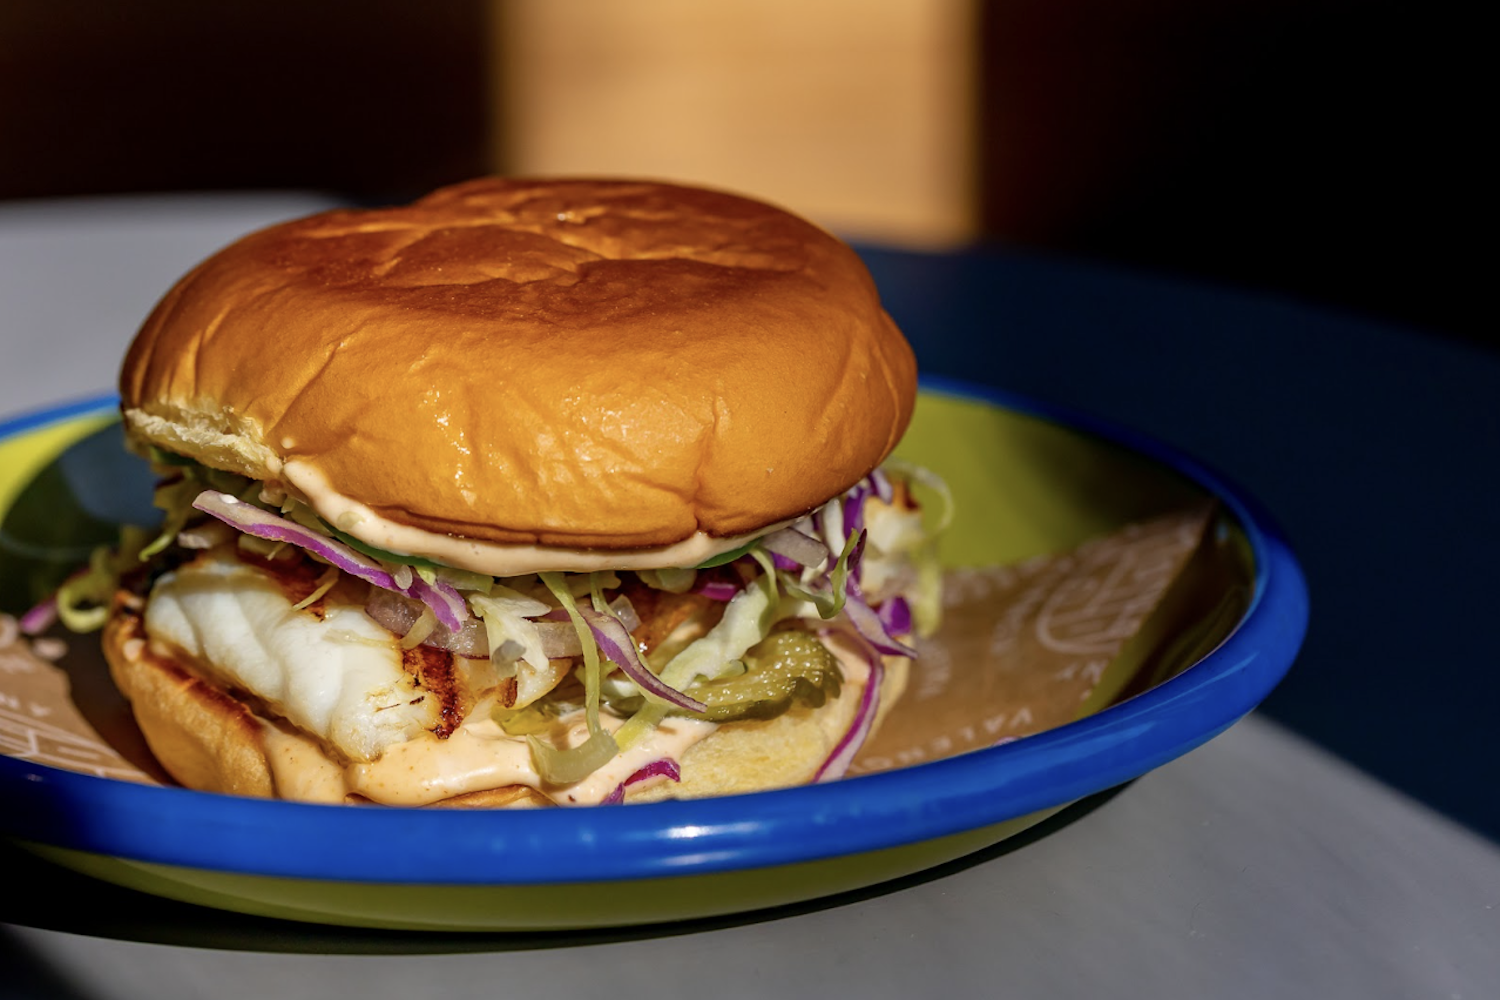 Fort Point's "Grilled Halibut Sandwich," stacked with slaw, pickles and remoulade on a toasted bun